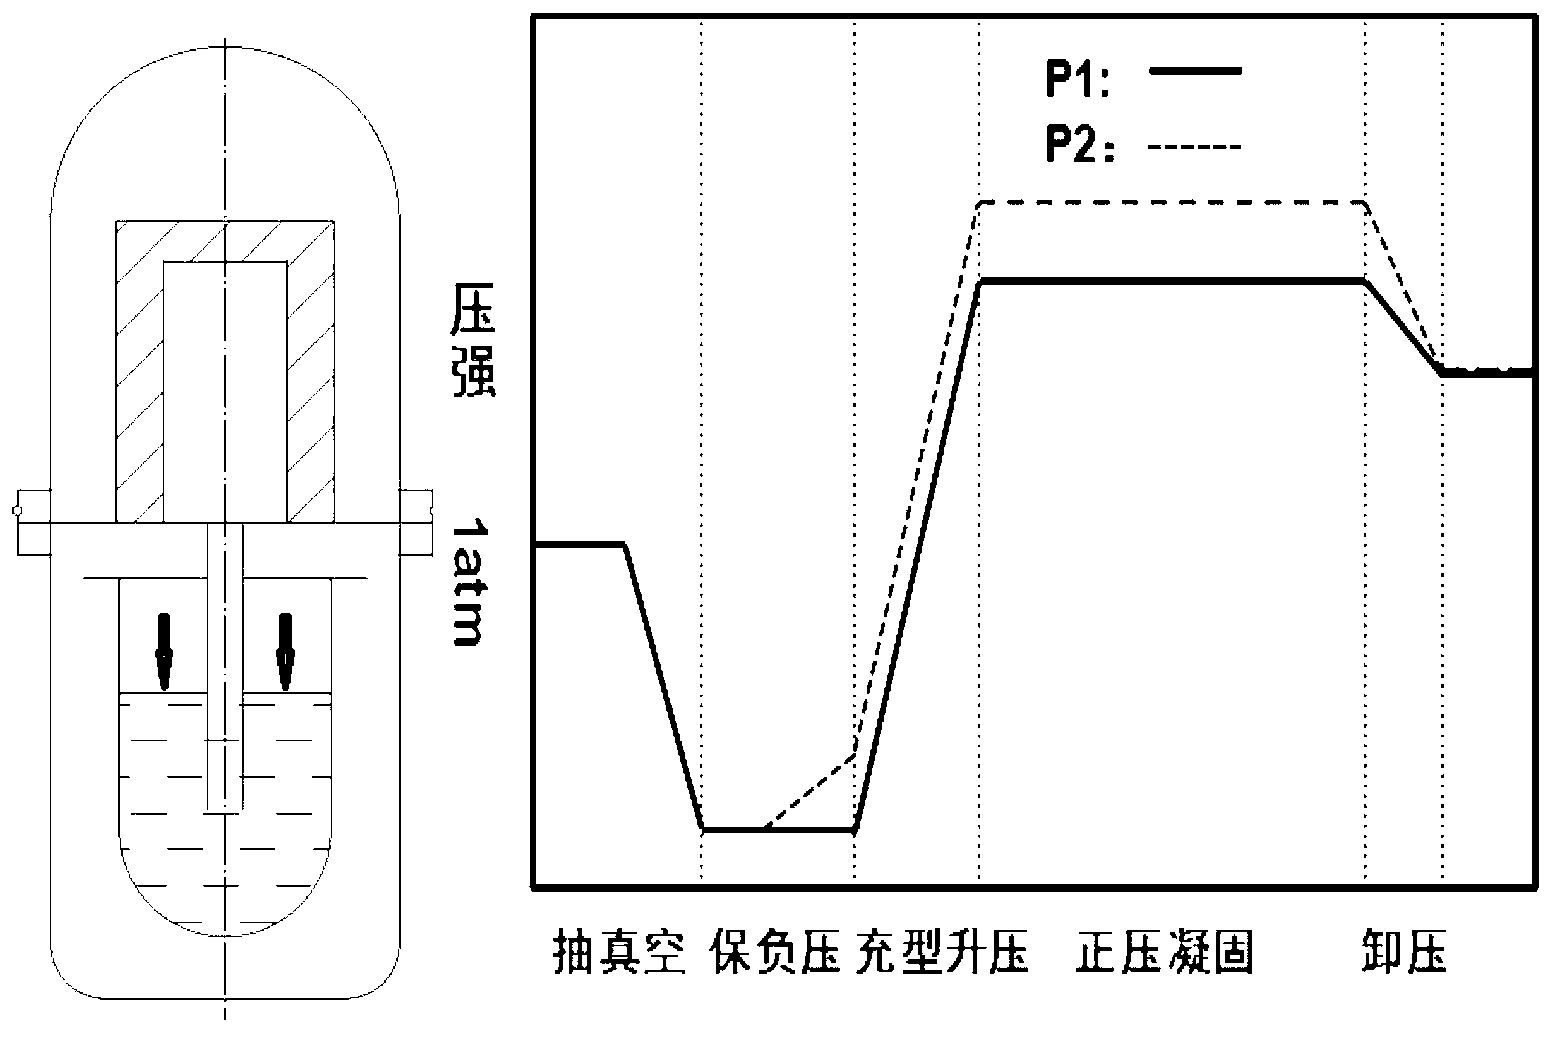 Precise casing method of tiles of floating wall of combustion chamber of aeroengine